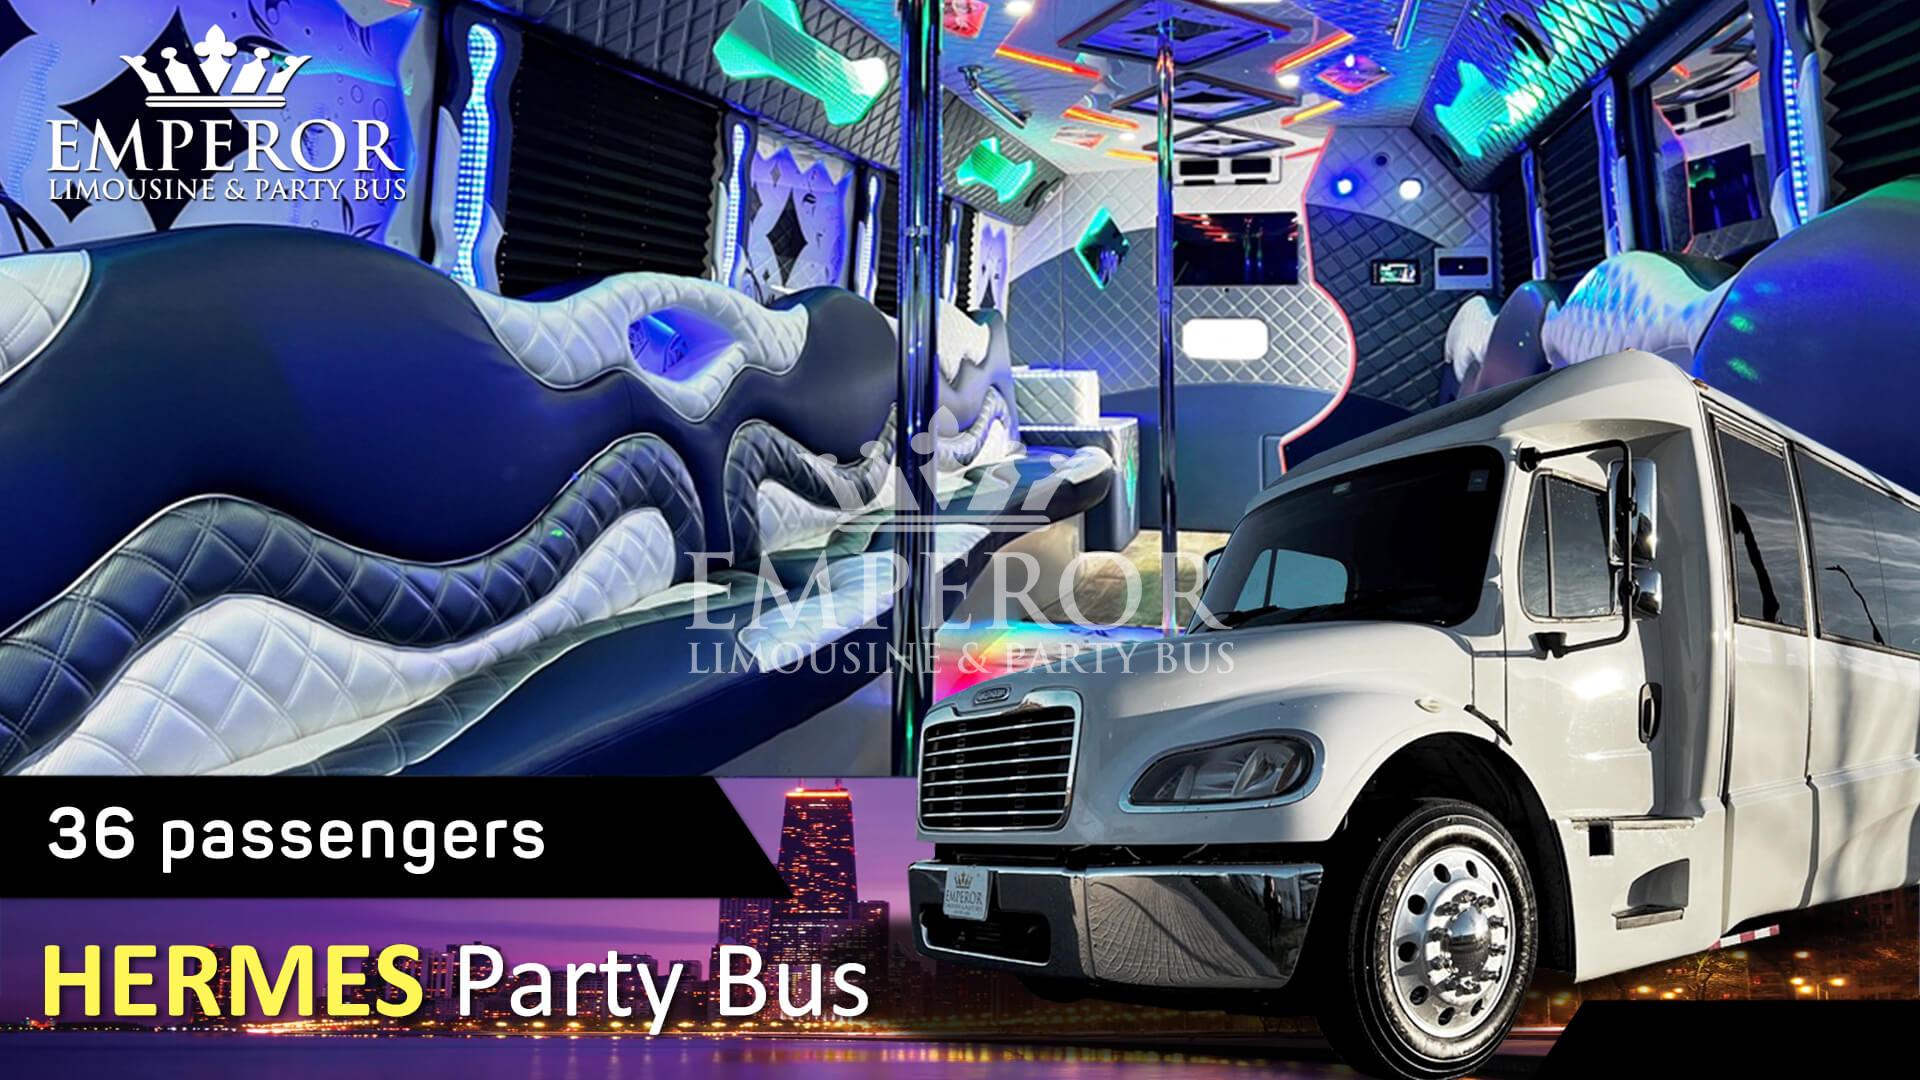 Party bus rental in Batavia, IL - Hermes Edition